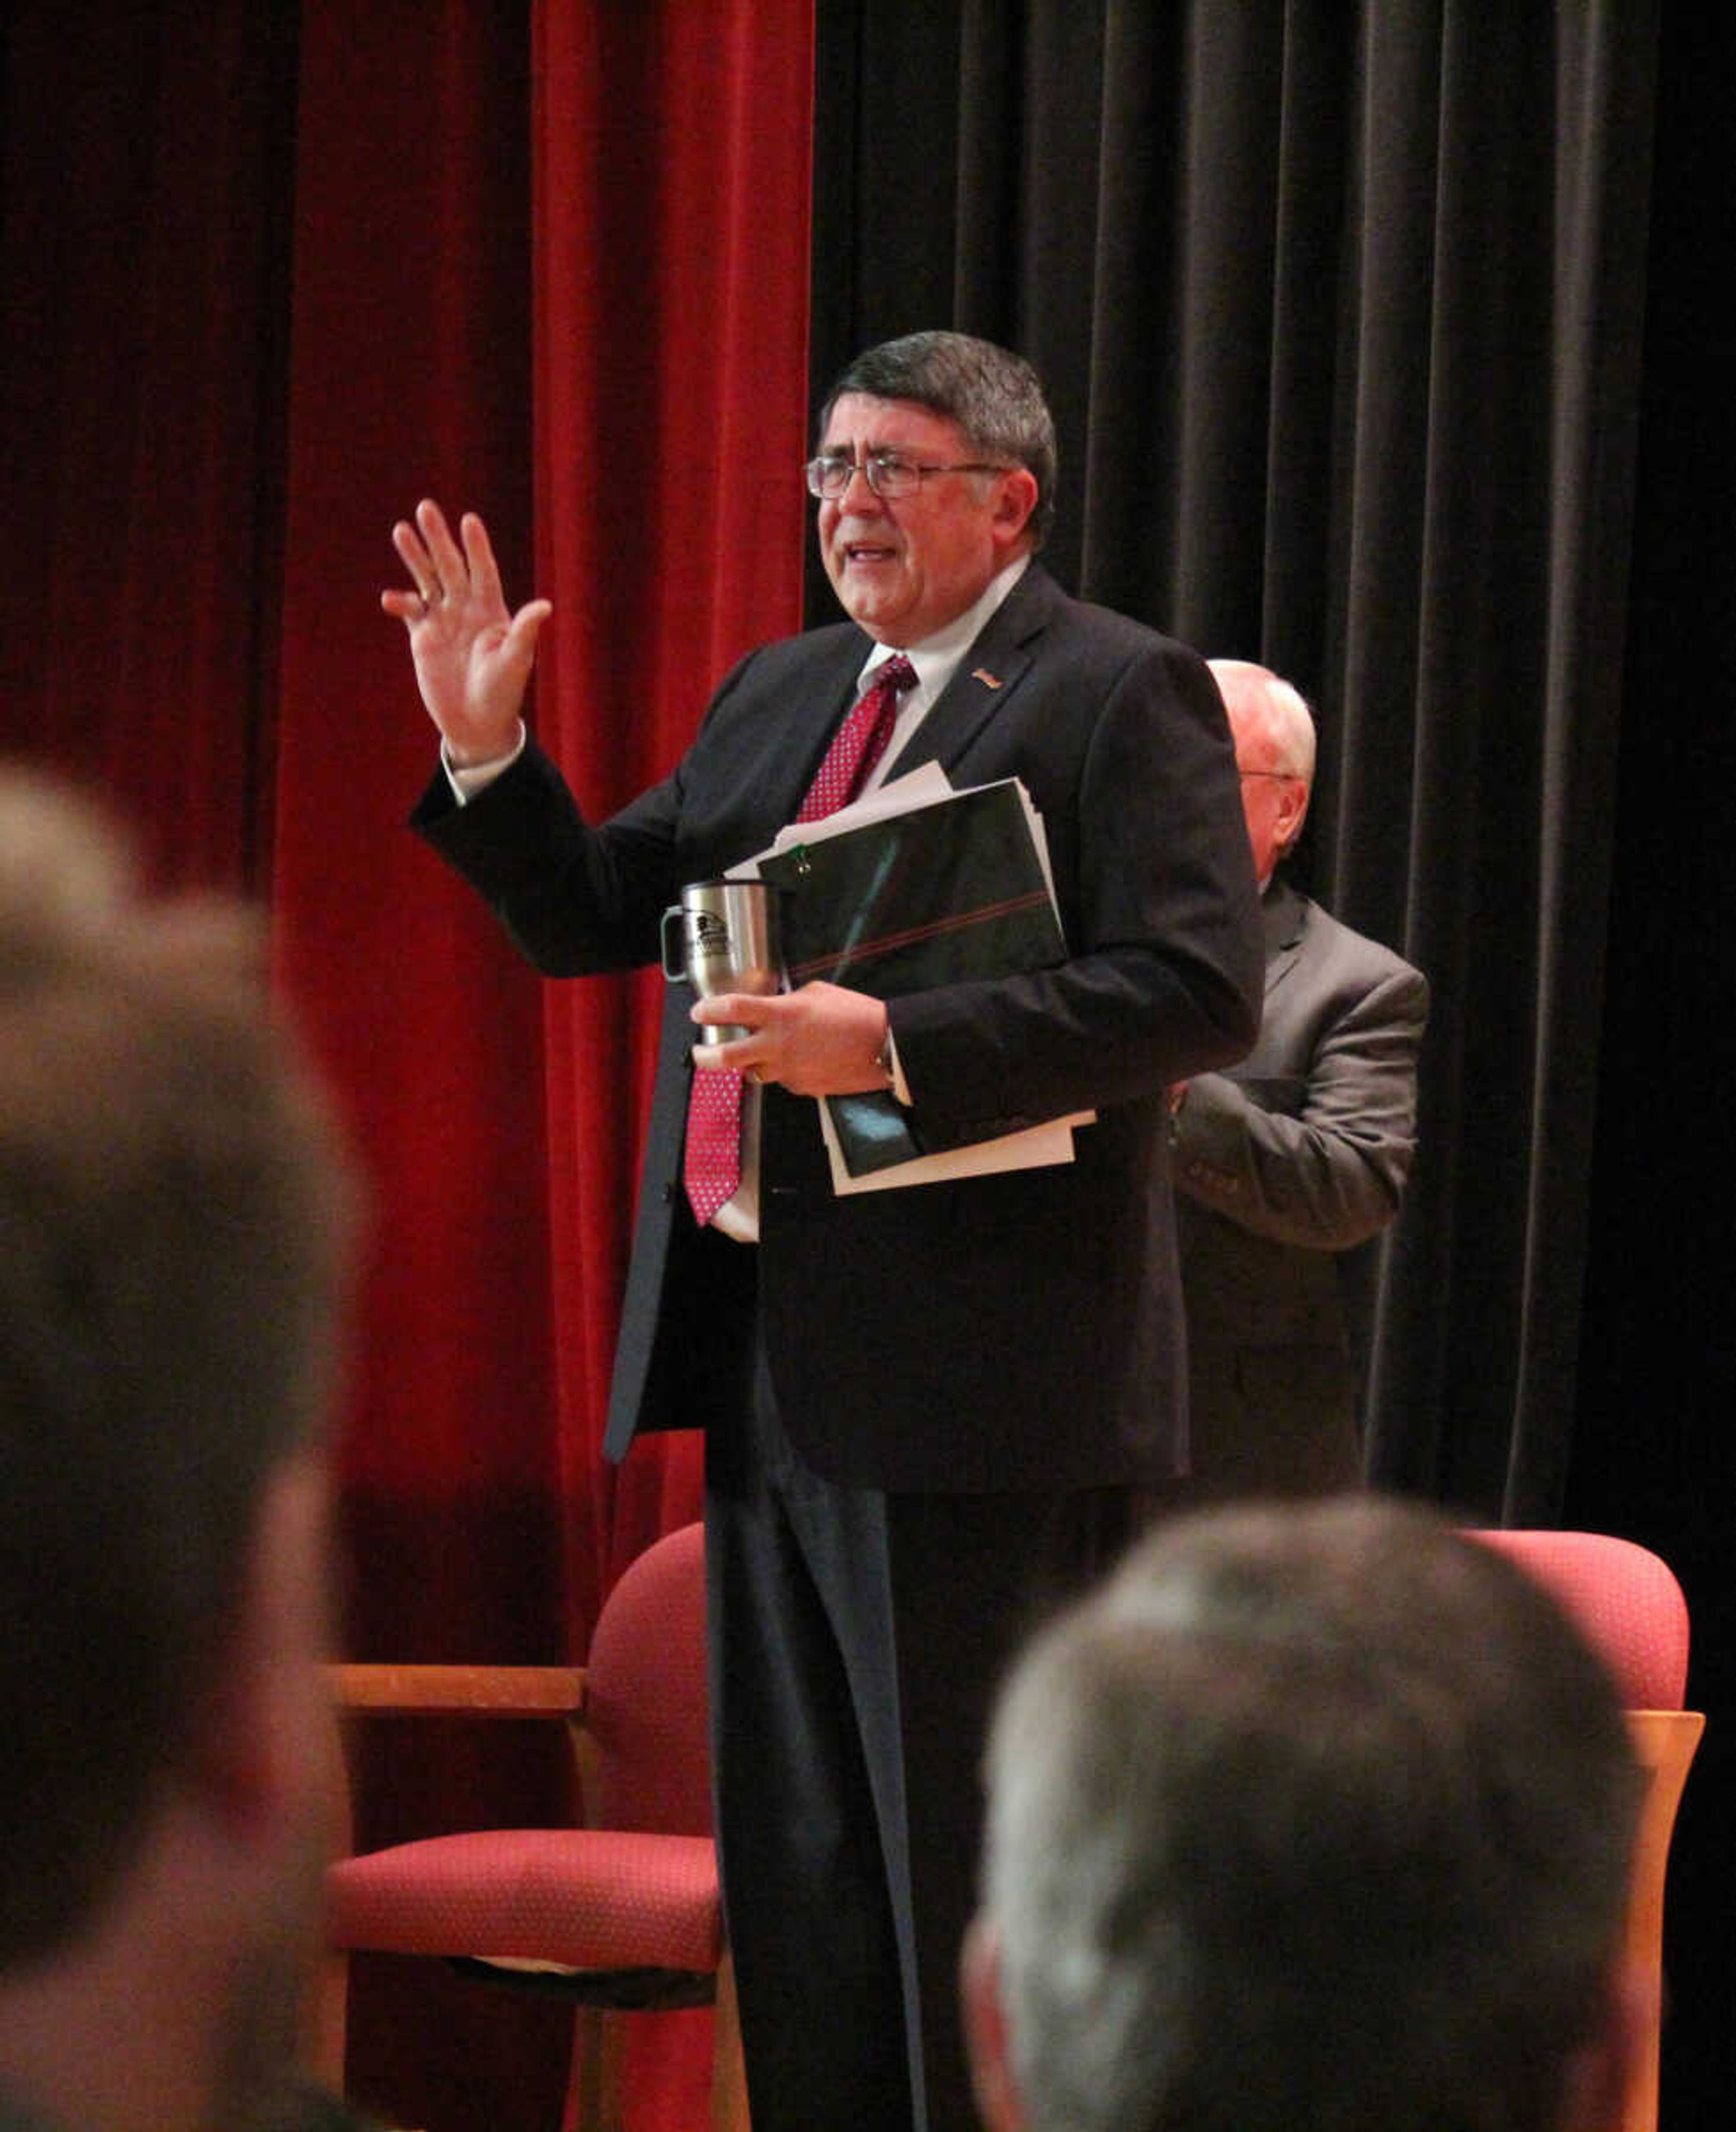 An emotional Southeast Missouri State University President Dr. Kenneth W. Dobbins waves to the crowd after he announced his retirement during the State of the University address on Monday in Academic Hall. (Photo by Sean Burke)